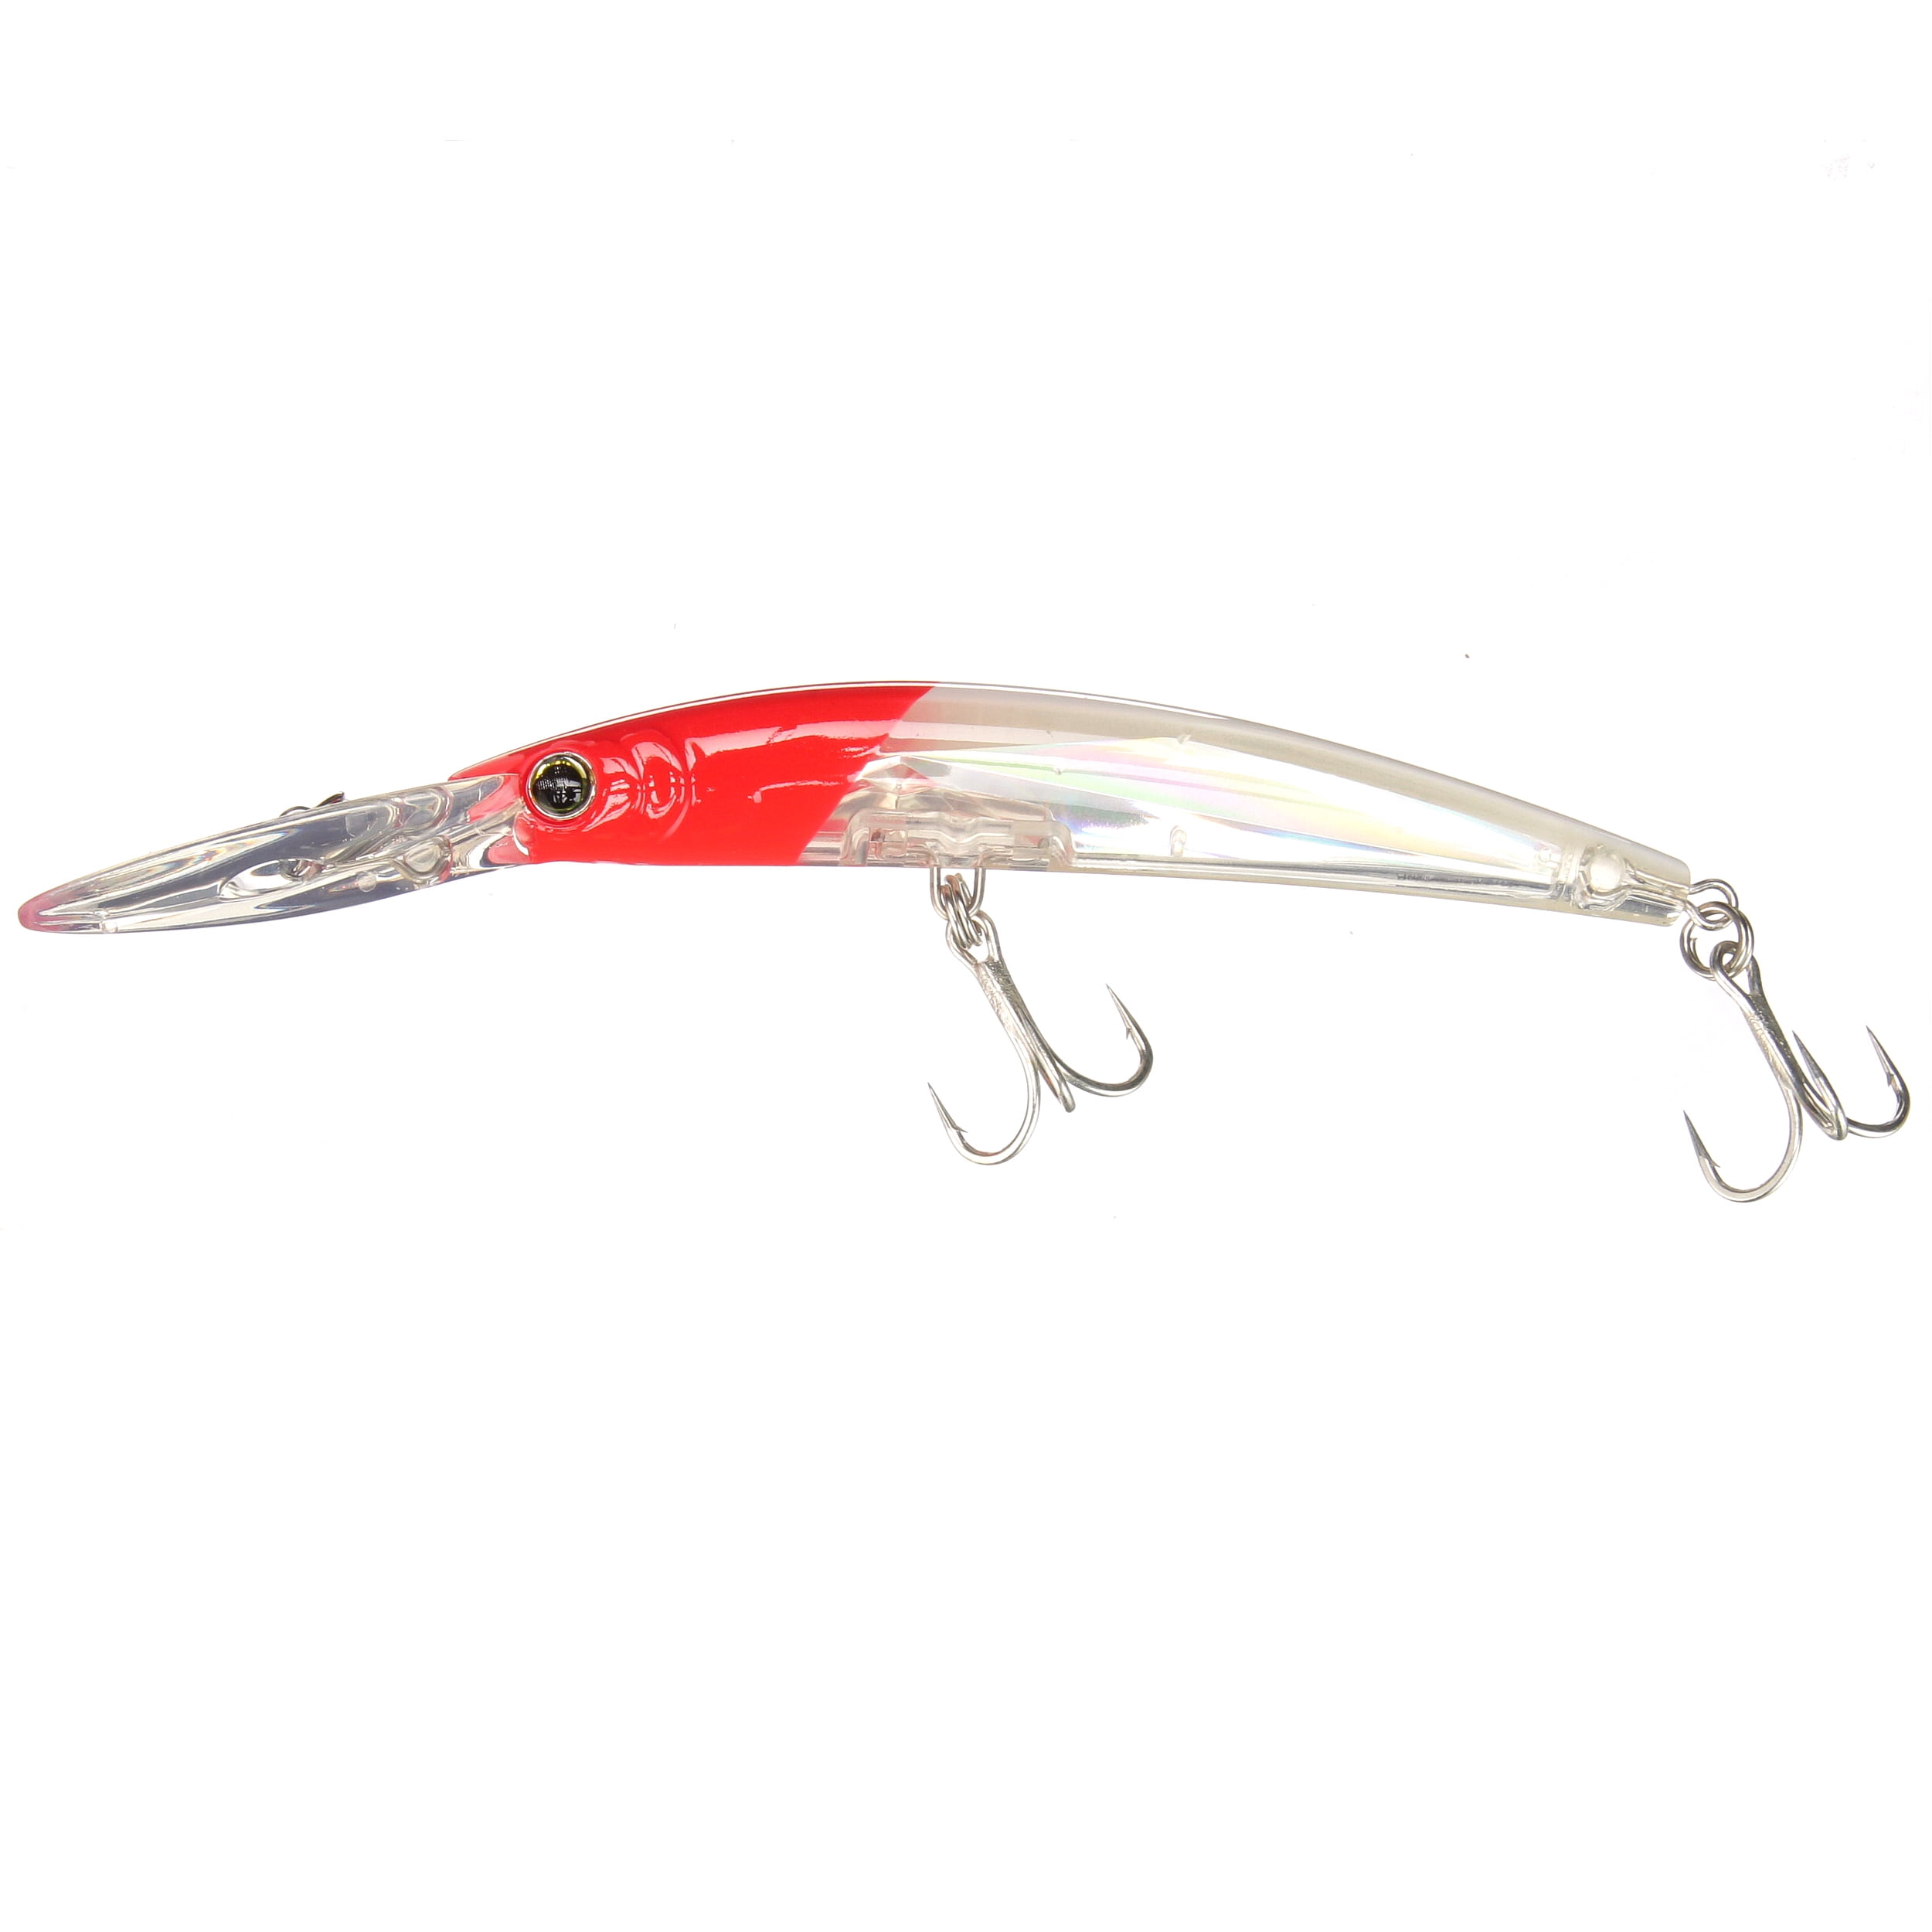 Yo-Zuri Crystal 3D Minnow Jointed F1051-HBK Holographic Bunker NEW 